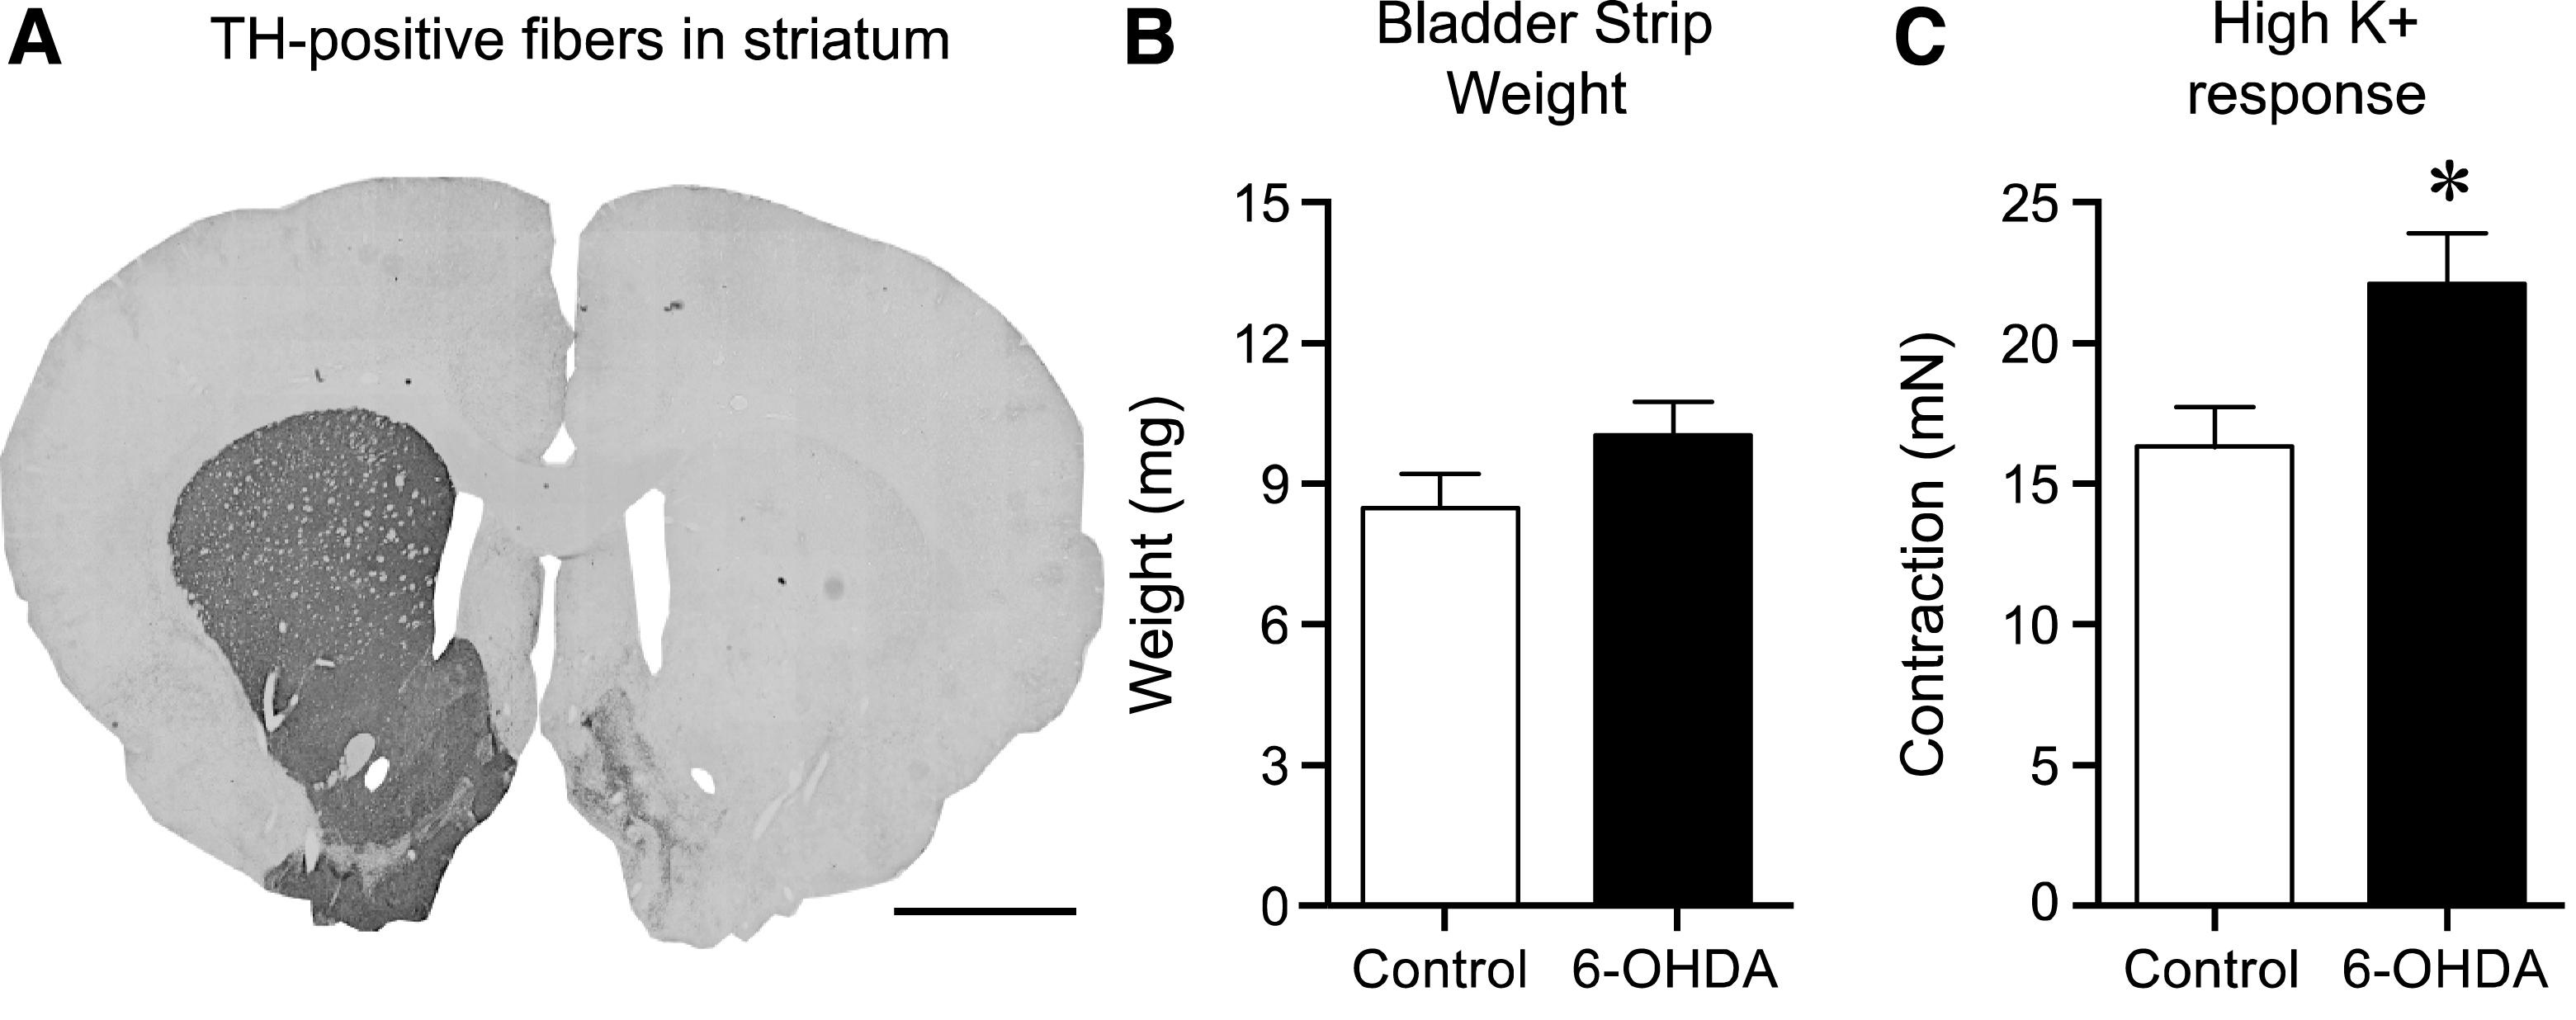 The effect of 6-OHDA lesion on striatal tyrosine hydroxylase (TH)-positive fibers, bladder weight and contractile response to high K
+ Krebs. Following unilateral 6-OHDA lesion TH-positive fibers in the striatum were >95% abolished as compared to the untreated side (A). The bladder strip weight in the 6-OHDA-lesioned animals showed a trend to be larger (10.0±0.8 mg, n = 17) as compared to normal (8.4±0.8 mg, n = 34), however this 20% increase was not significant (p = 0.20, unpaired t-test; B). Testing the viability of the strips by using high K
+ Krebs solution revealed a significantly (36% ) higher response in the 6-OHDA-lesioned animals as compared to the untreated controls; 22.1±1.8 mN (n = 34) vs. 16.2±1.5 mN (n = 17) respectively (unpaired t-test p = 0.022; C). Scale bar in Panel A represents 2 mm.  * = significantly different from control.